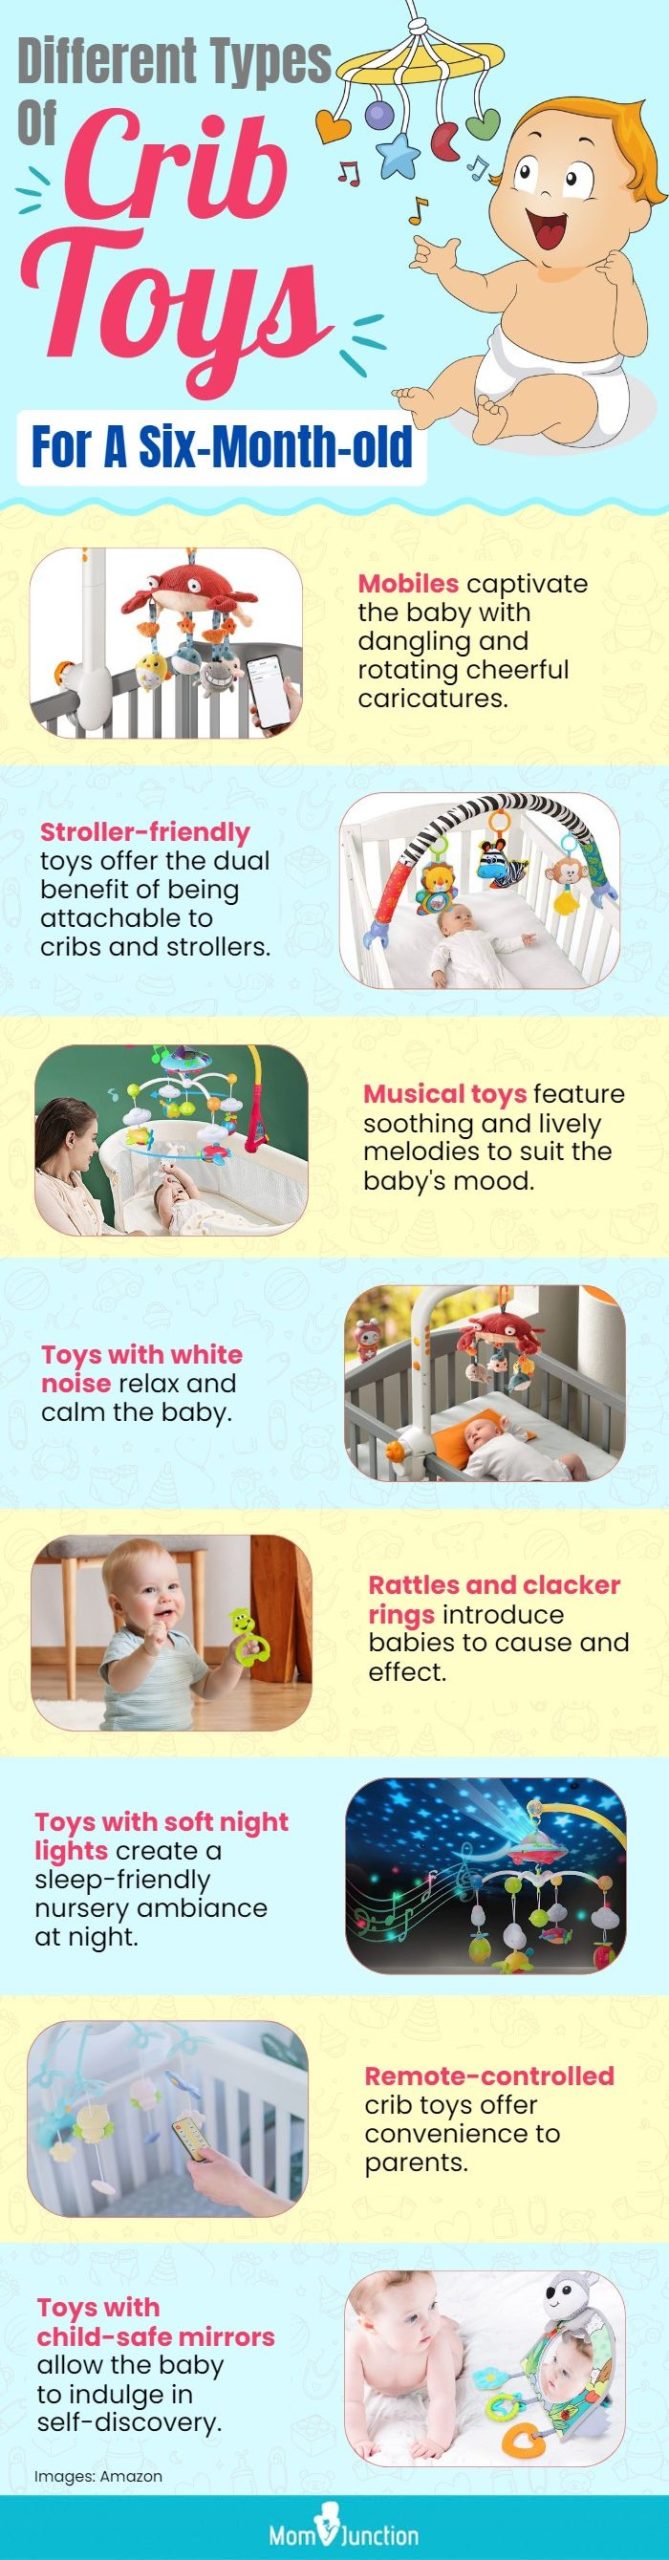 Different Types Of Crib Toys For A Six-Month-old (infographic)